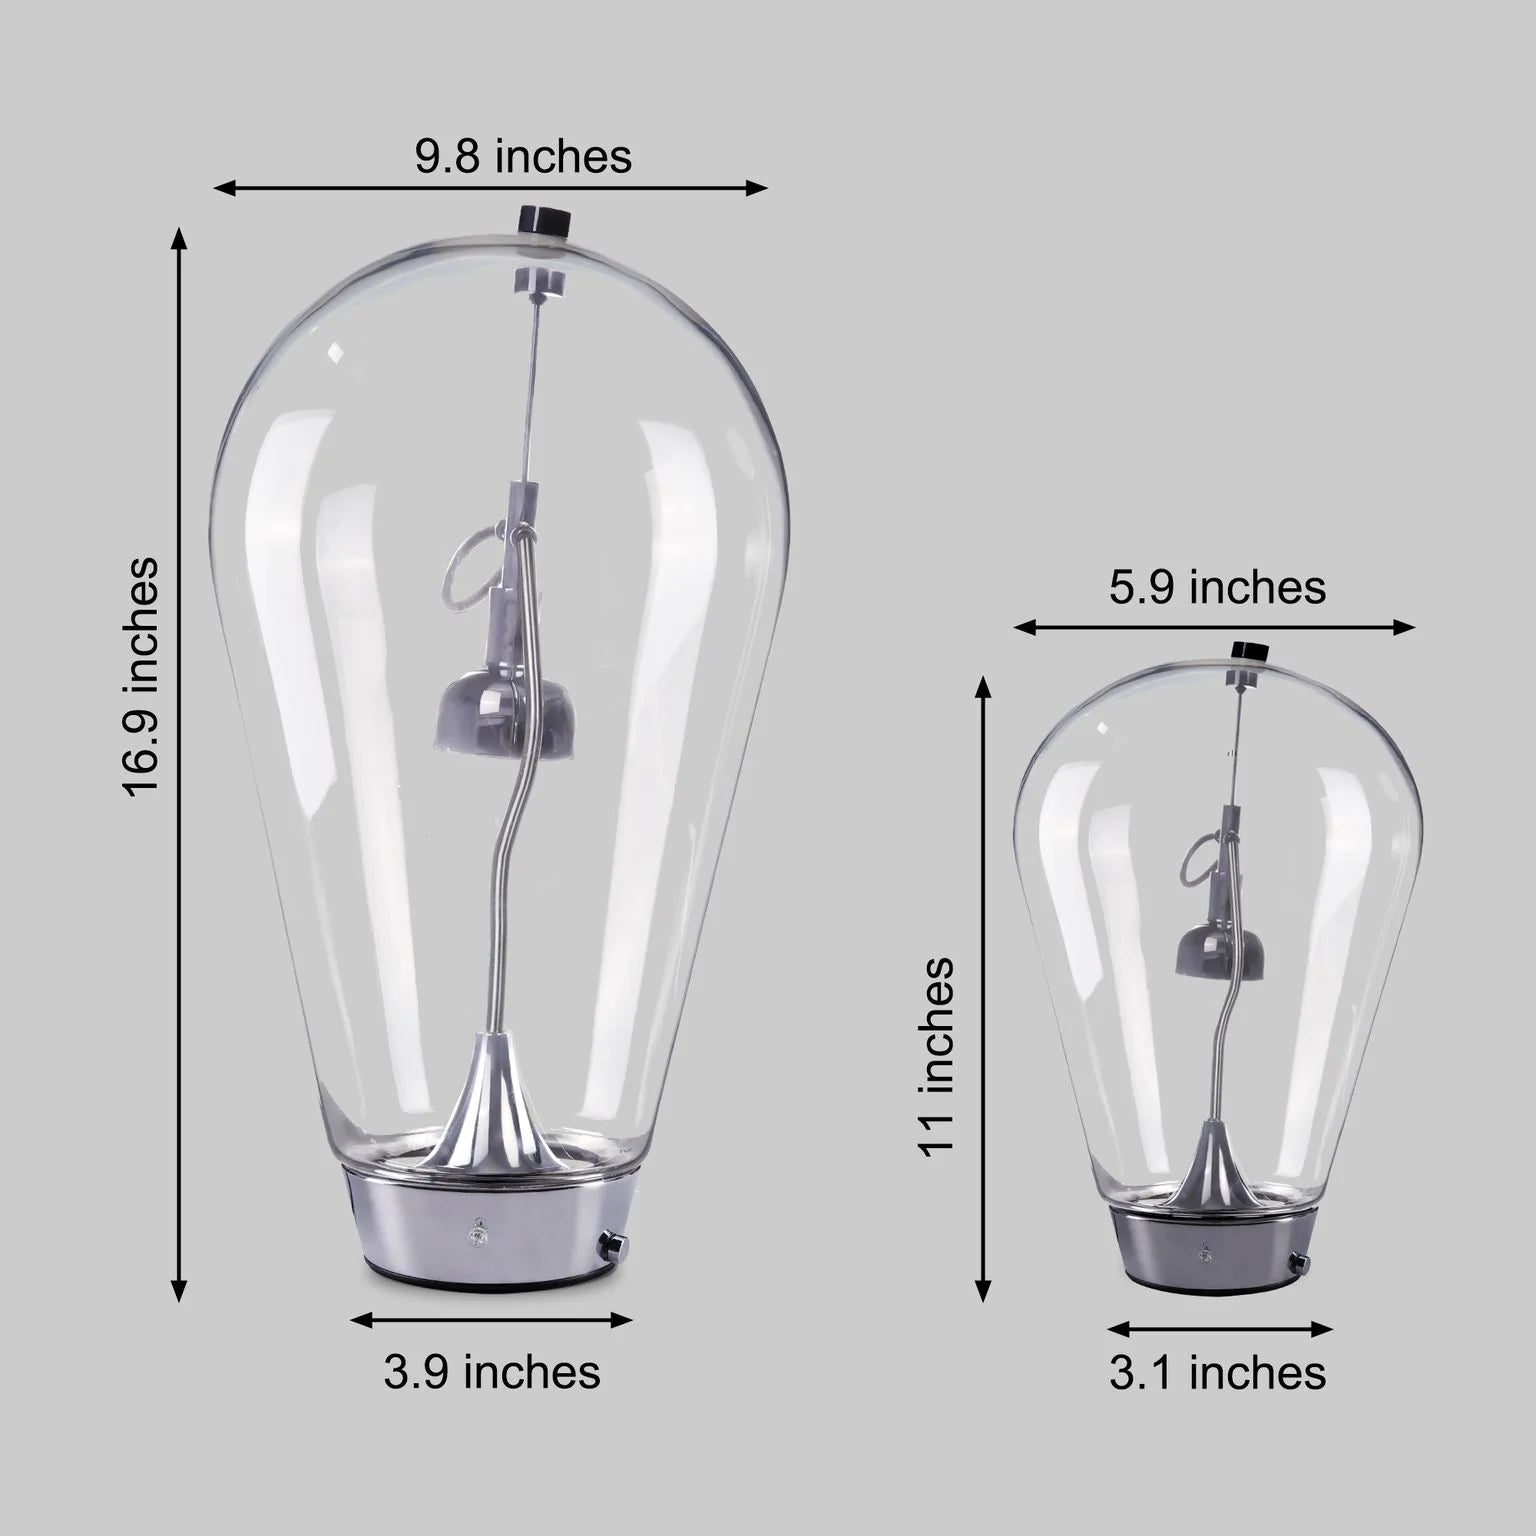 Adjustable Magnetic Bulb Night Lamp - Perfect for Creating Ambiance in Your Home